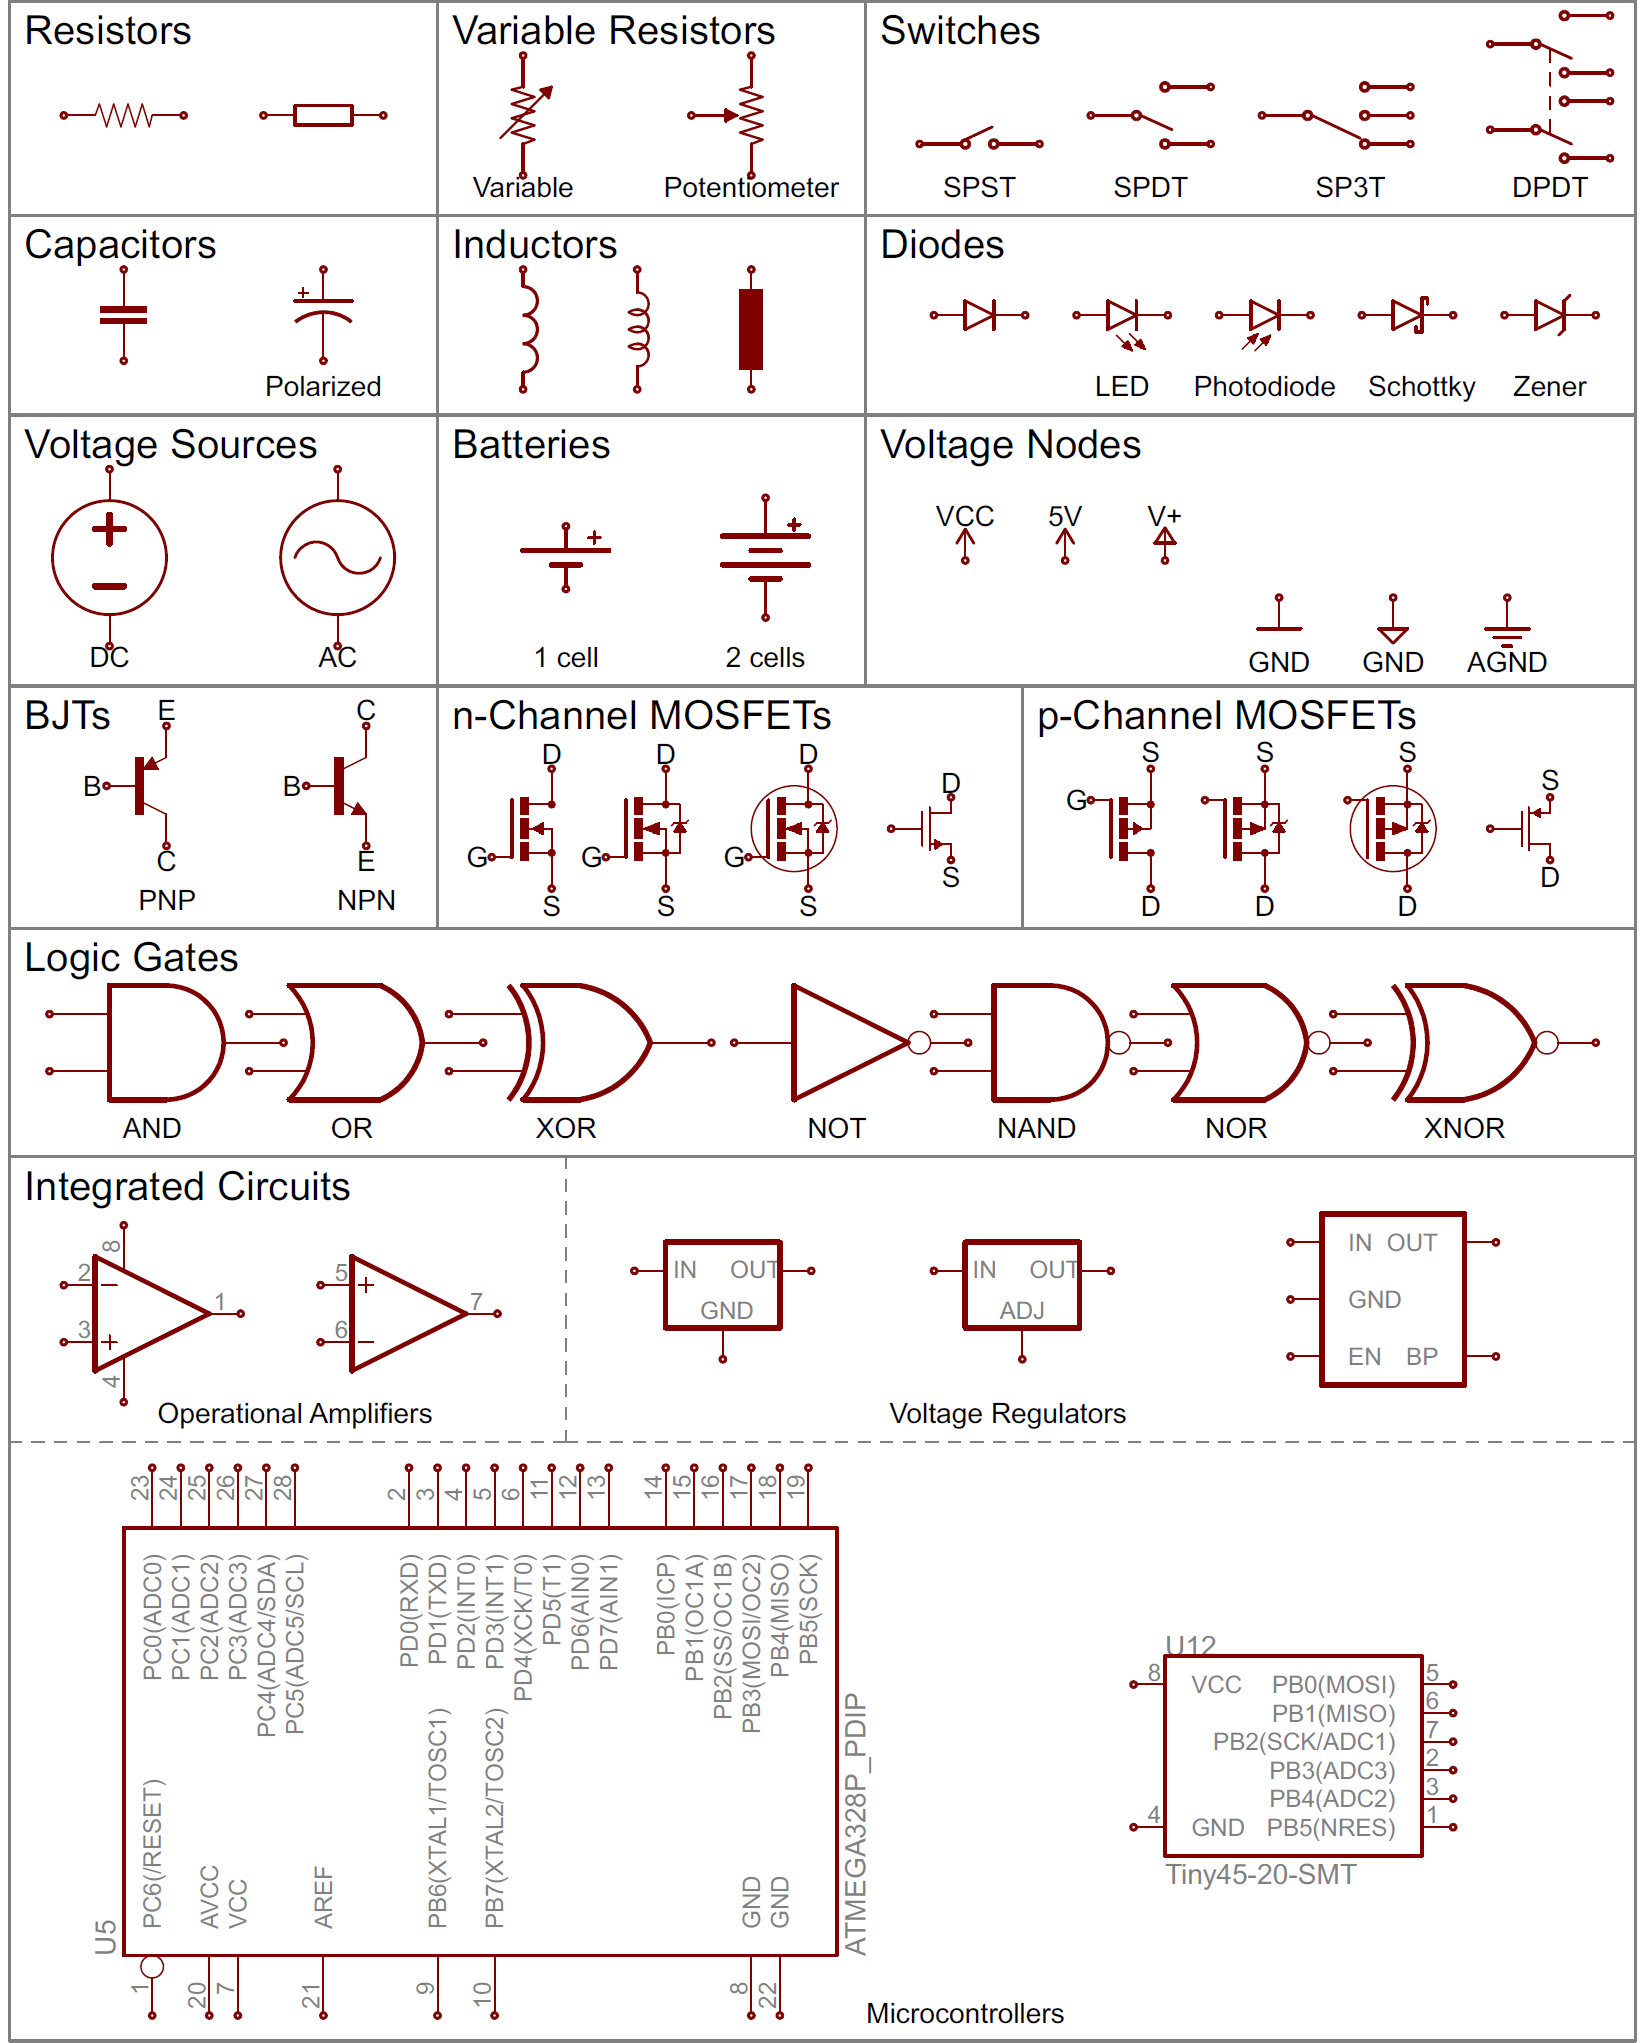 How To Read A Schematic - Learn.sparkfun - Wiring Schematic Diagram